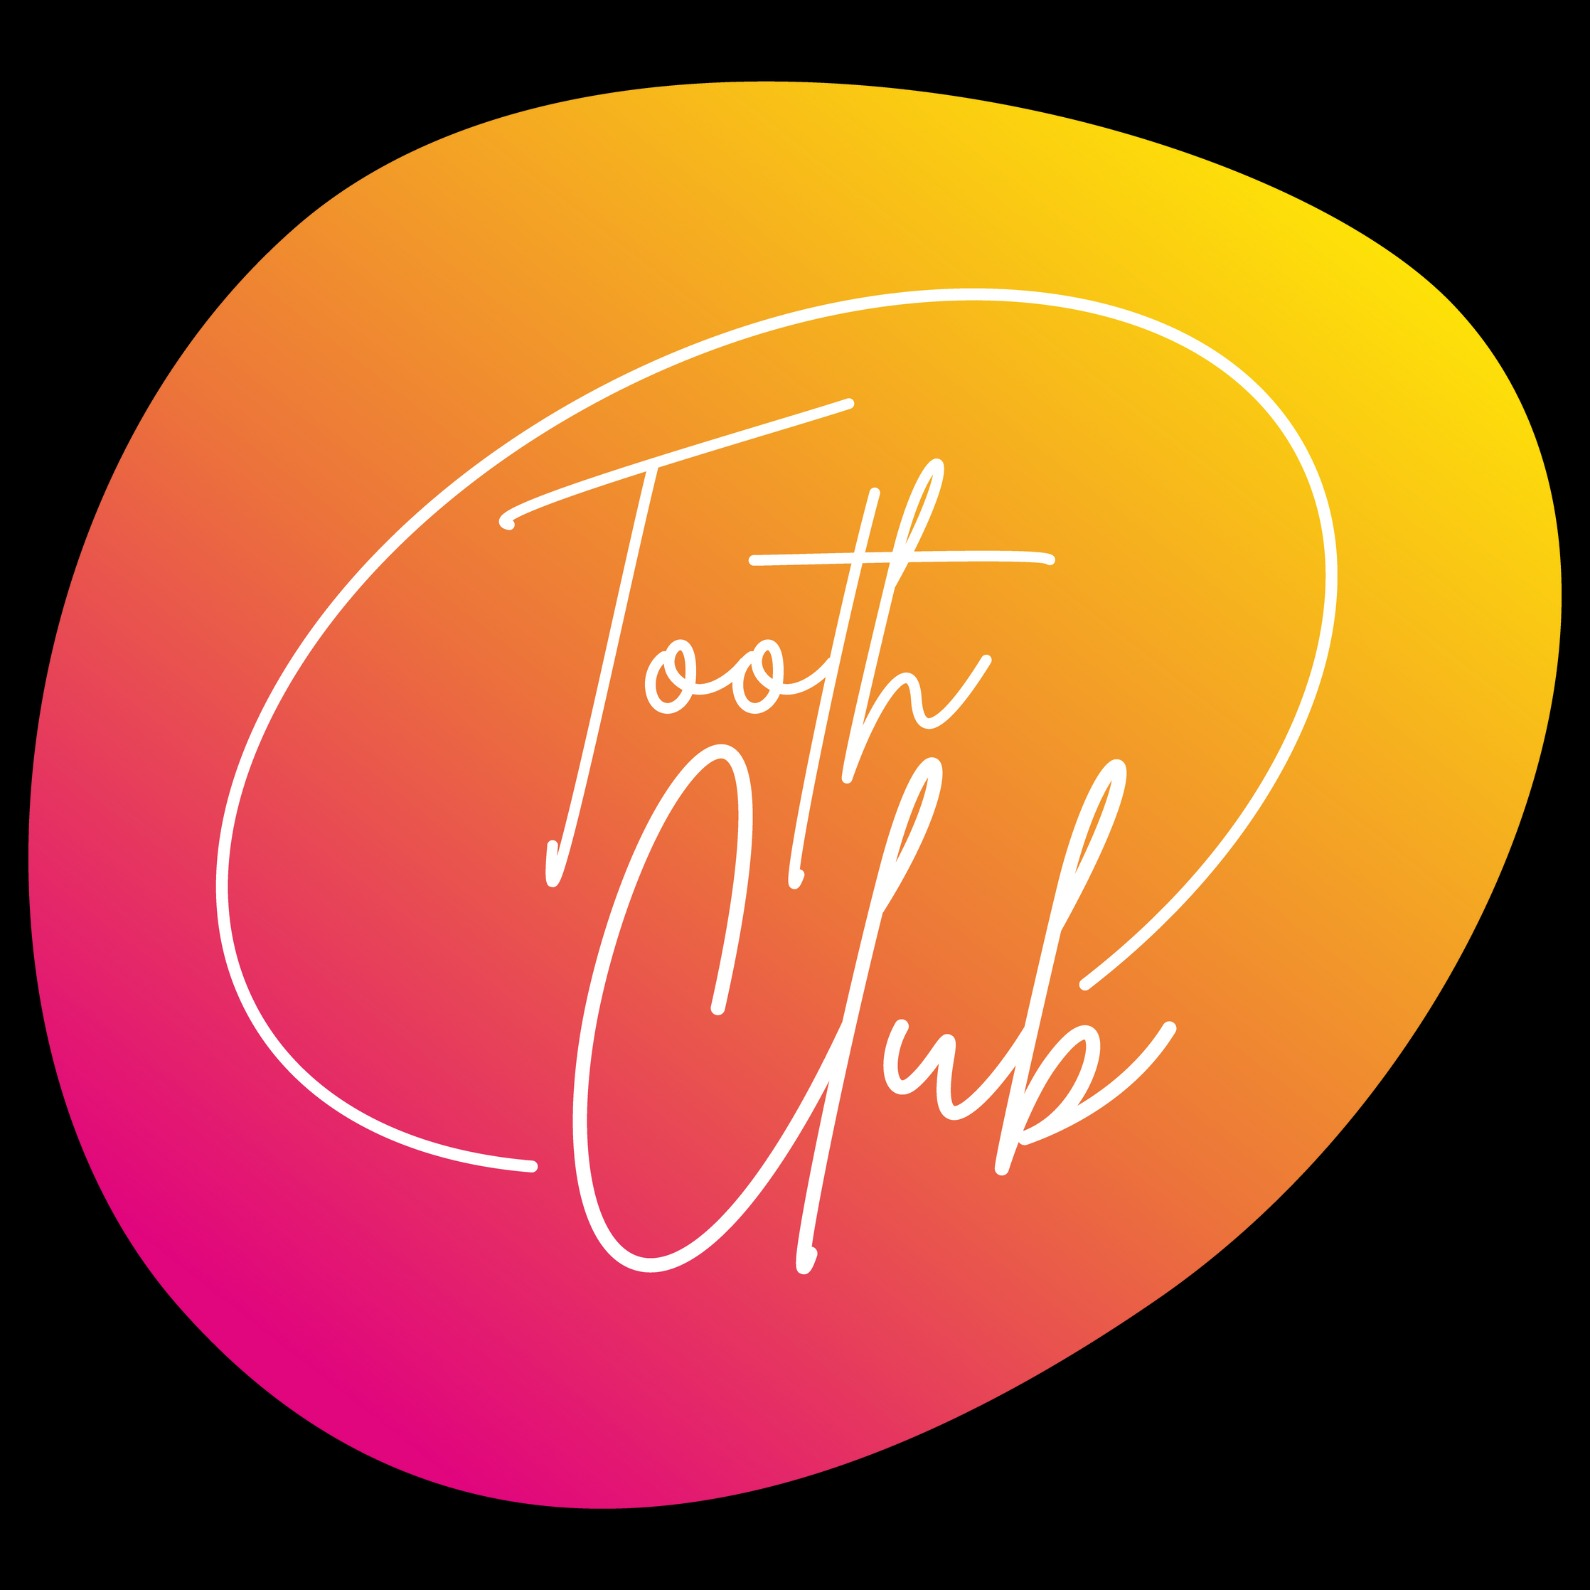 Tooth Club Logo Station Road Dental Practice Loughton 03332 419130